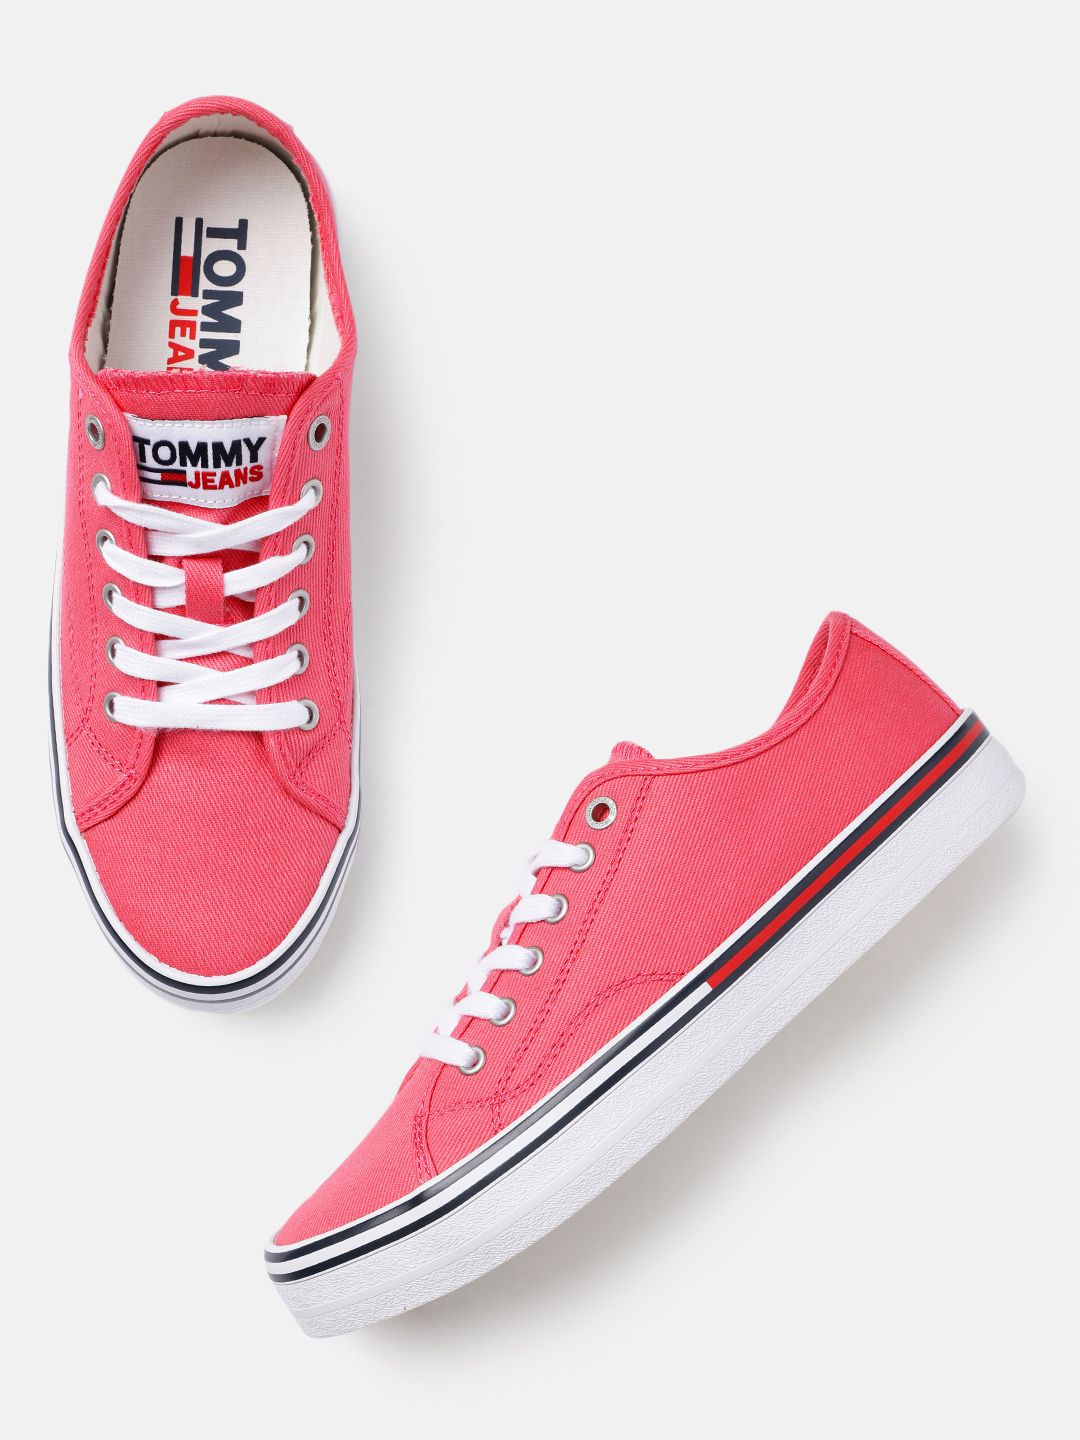 Tommy Hilfiger Women Pink ESSENTIAL Sneakers Price in India